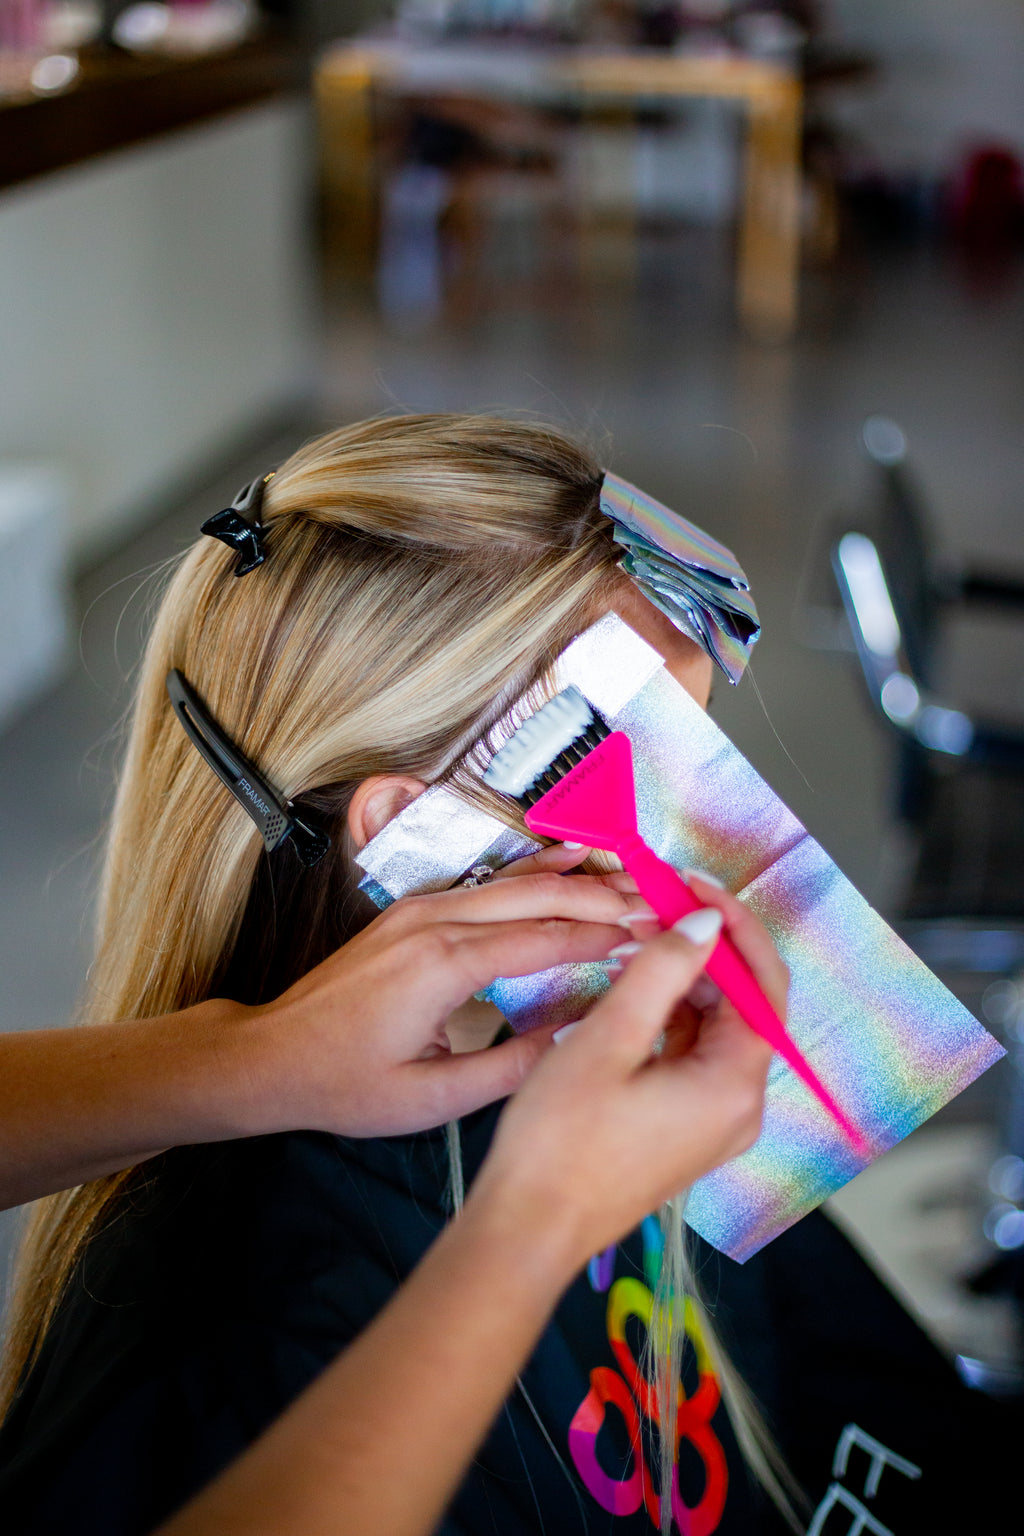 Sharing my favorite Framar tools  Why you need Framar foils and color  brushes as a hairstylist! 